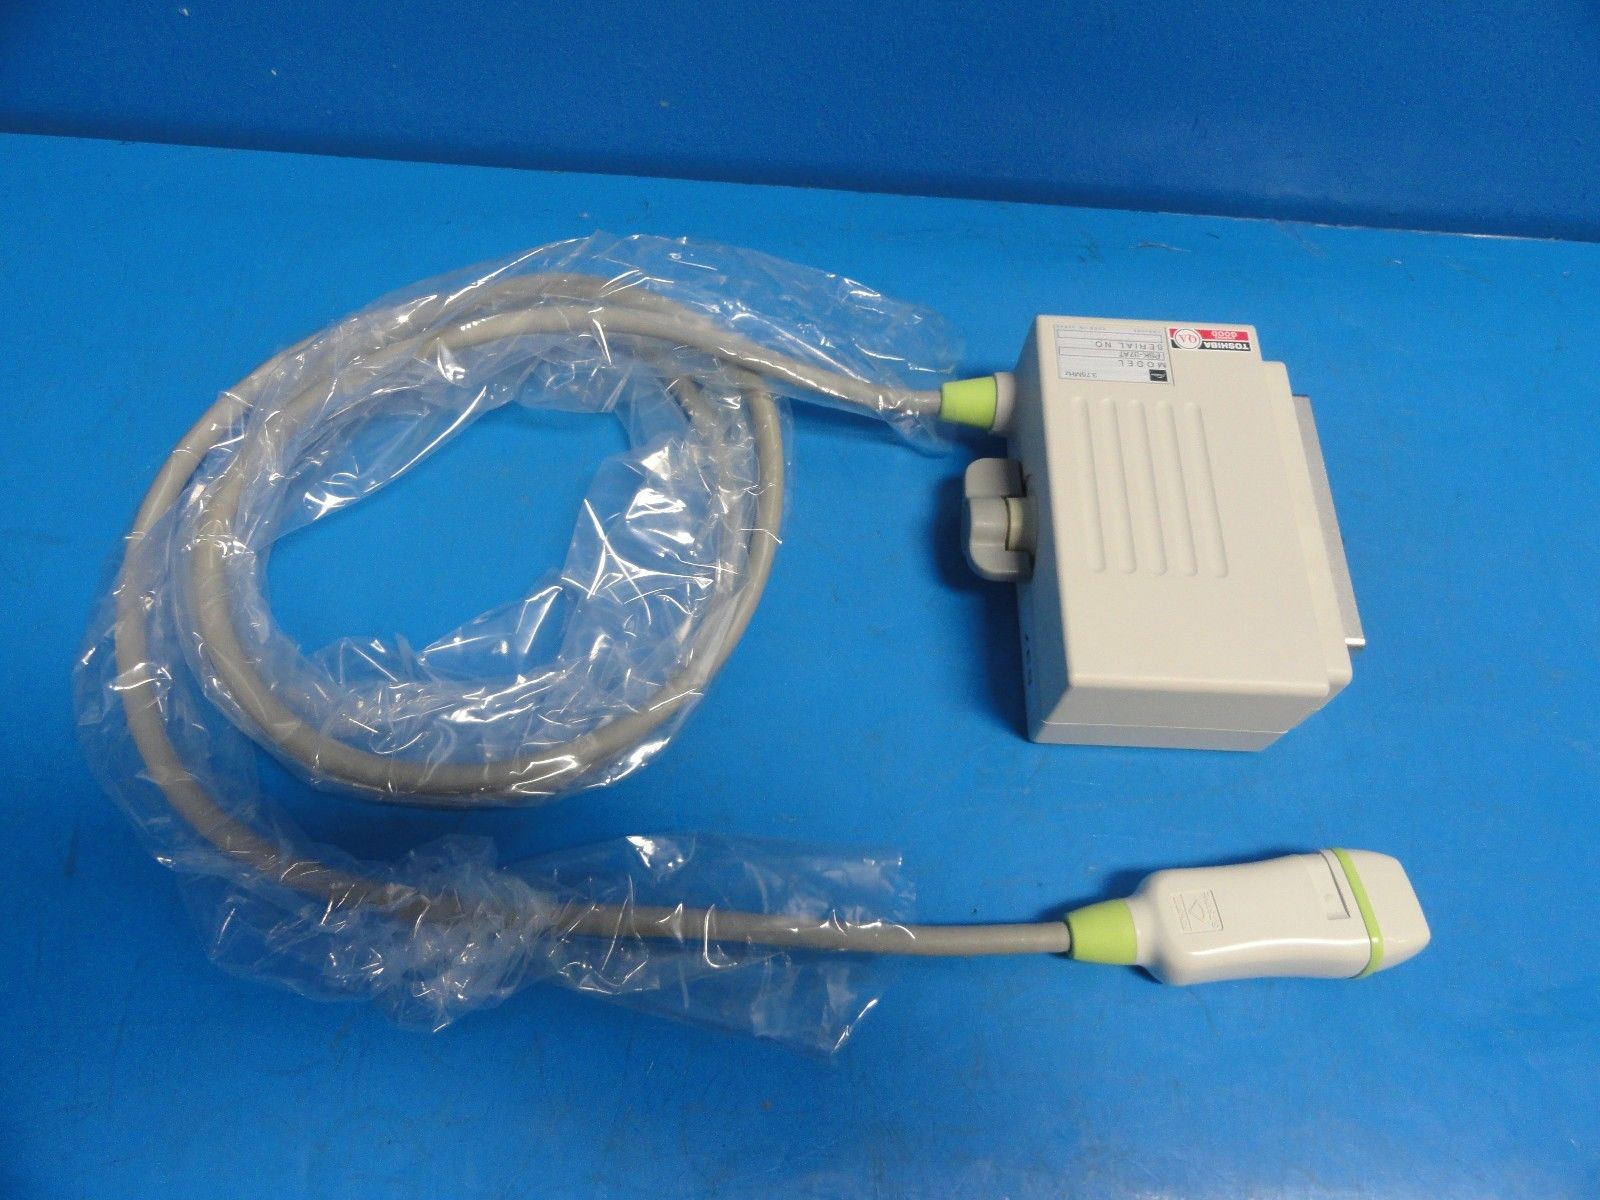 Toshiba PSK-37AT Phased Array Ultrasound Probe for PowerVision 7000 (8951) DIAGNOSTIC ULTRASOUND MACHINES FOR SALE